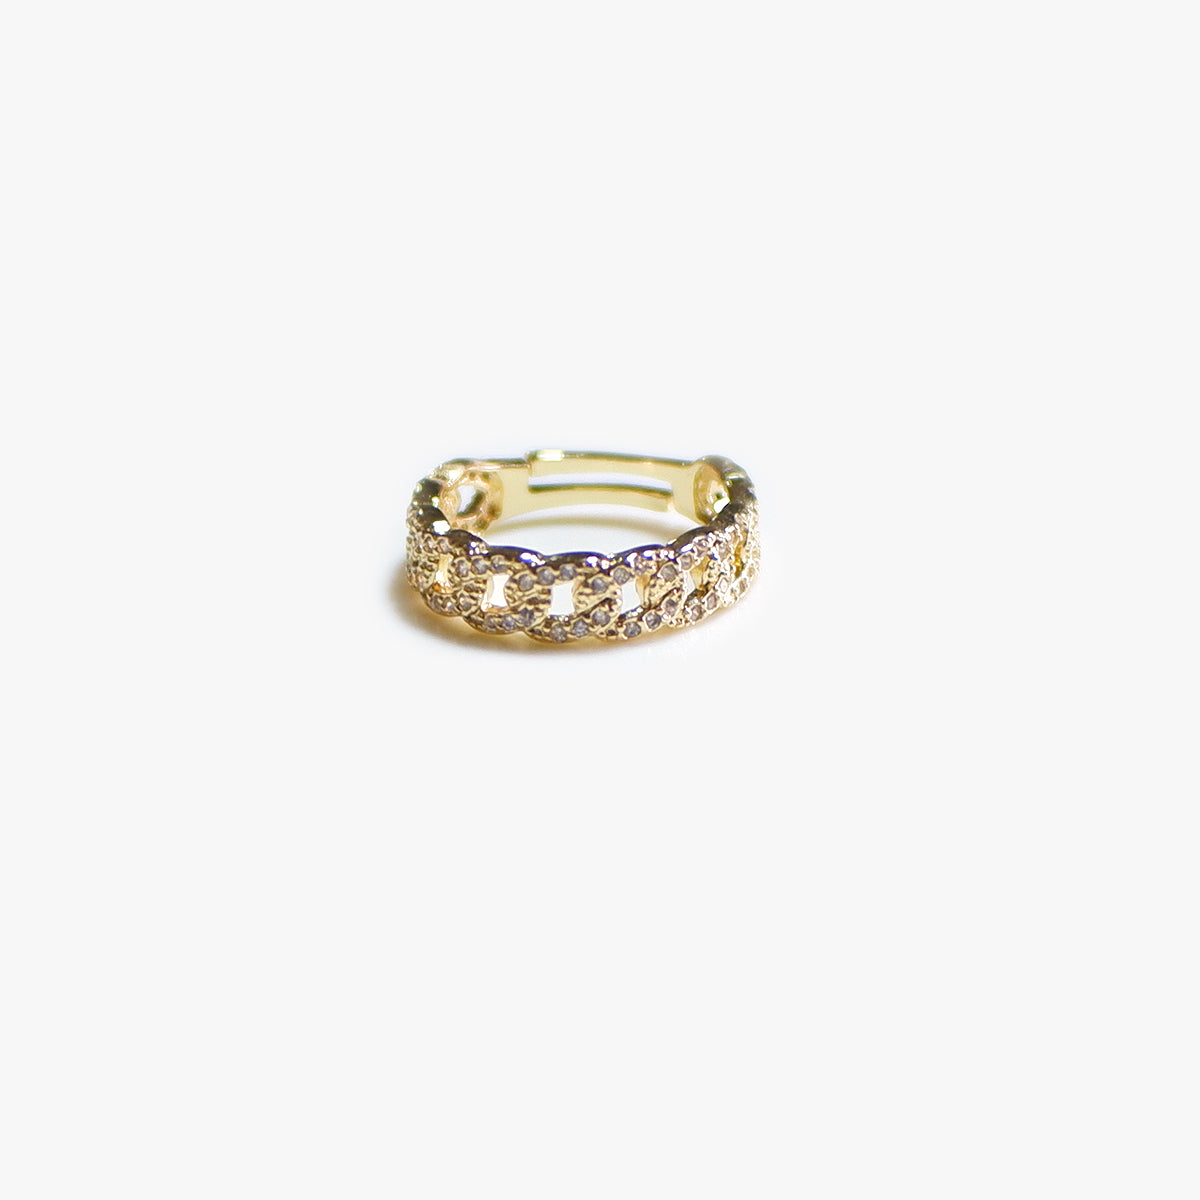 The Any-size Pave Money Ring